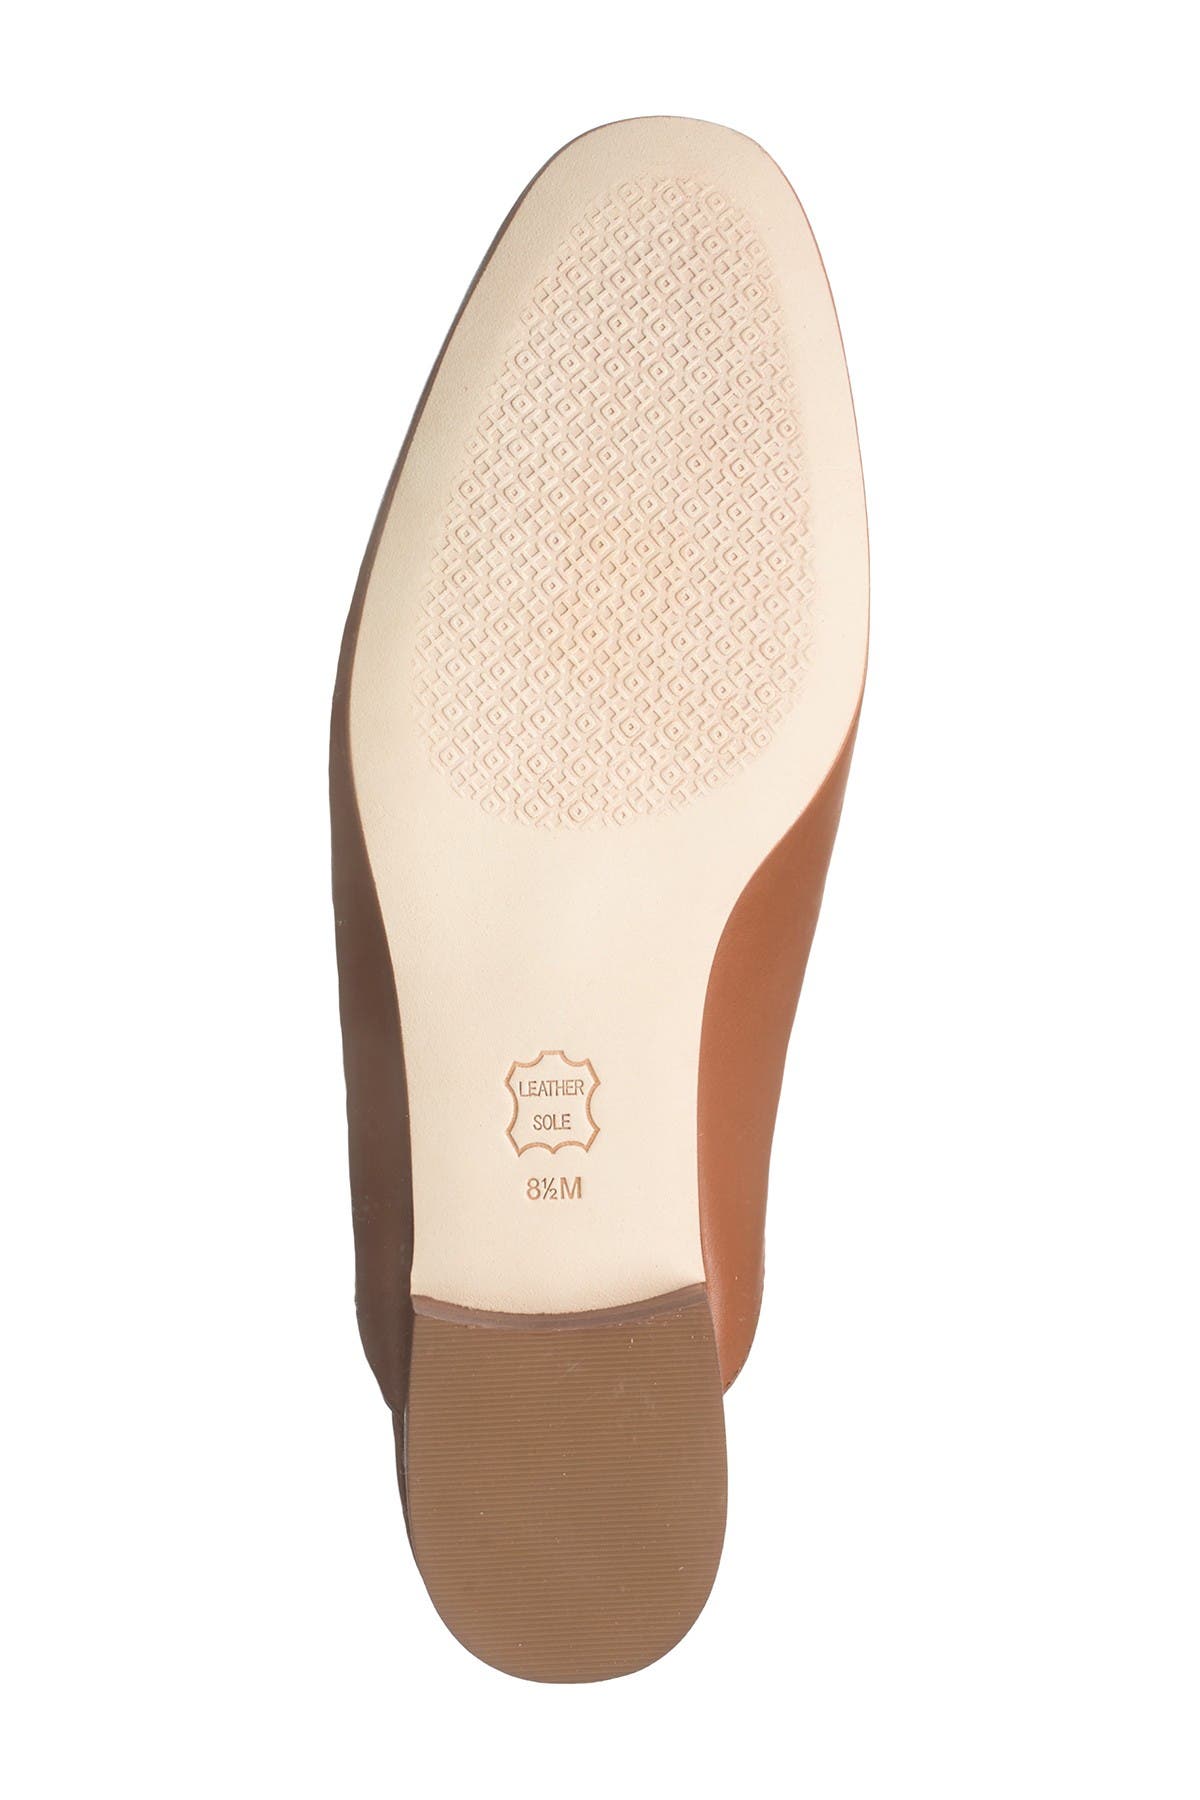 tory burch mules nordstrom